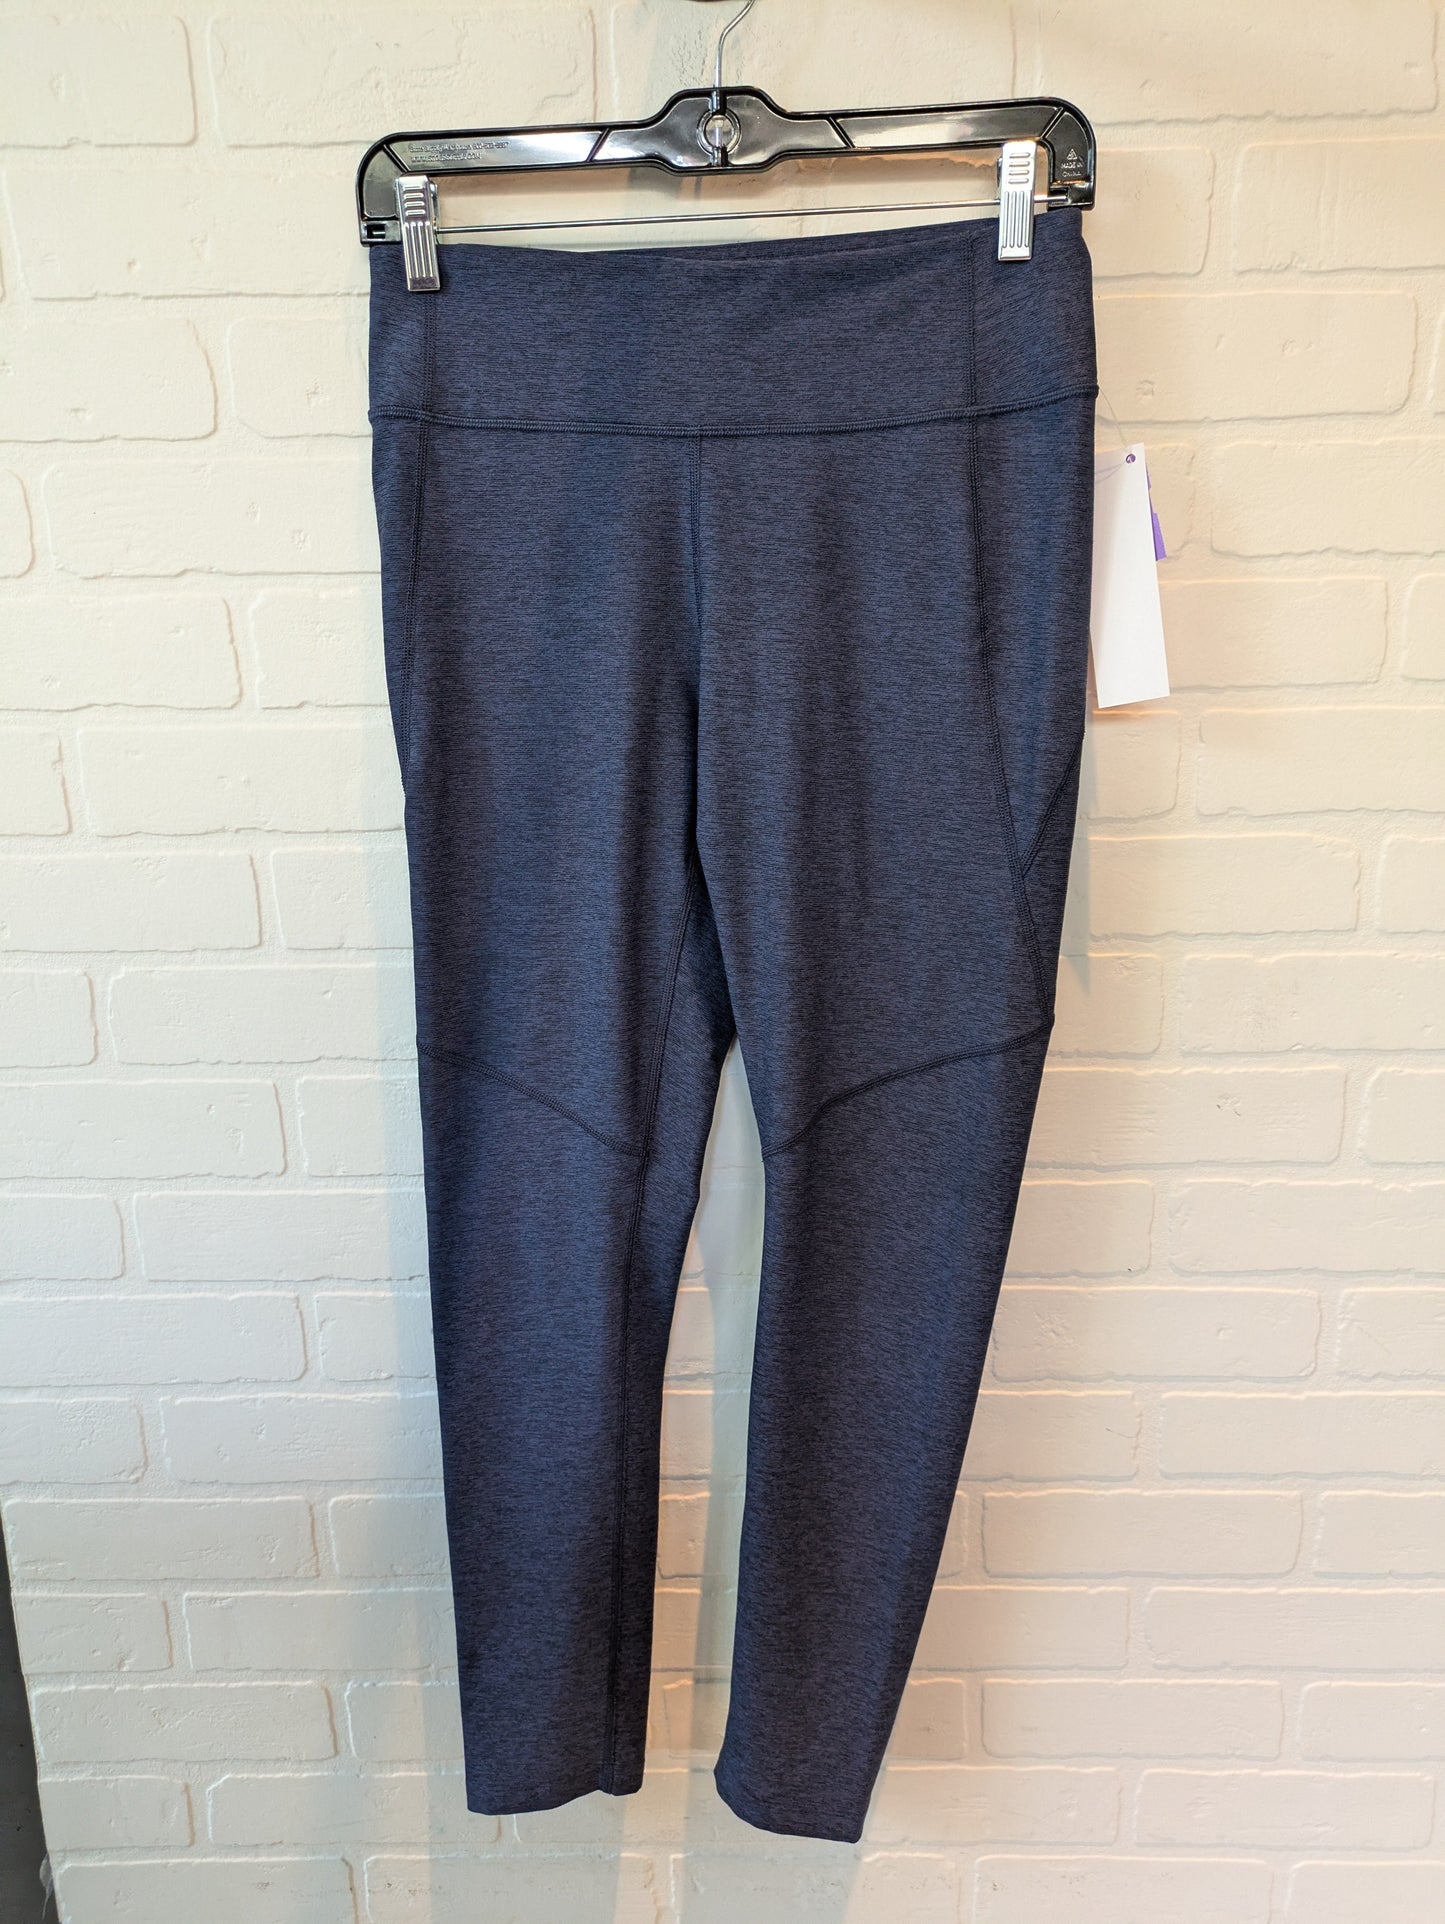 Blue Athletic Leggings Outdoor Voices, Size 8